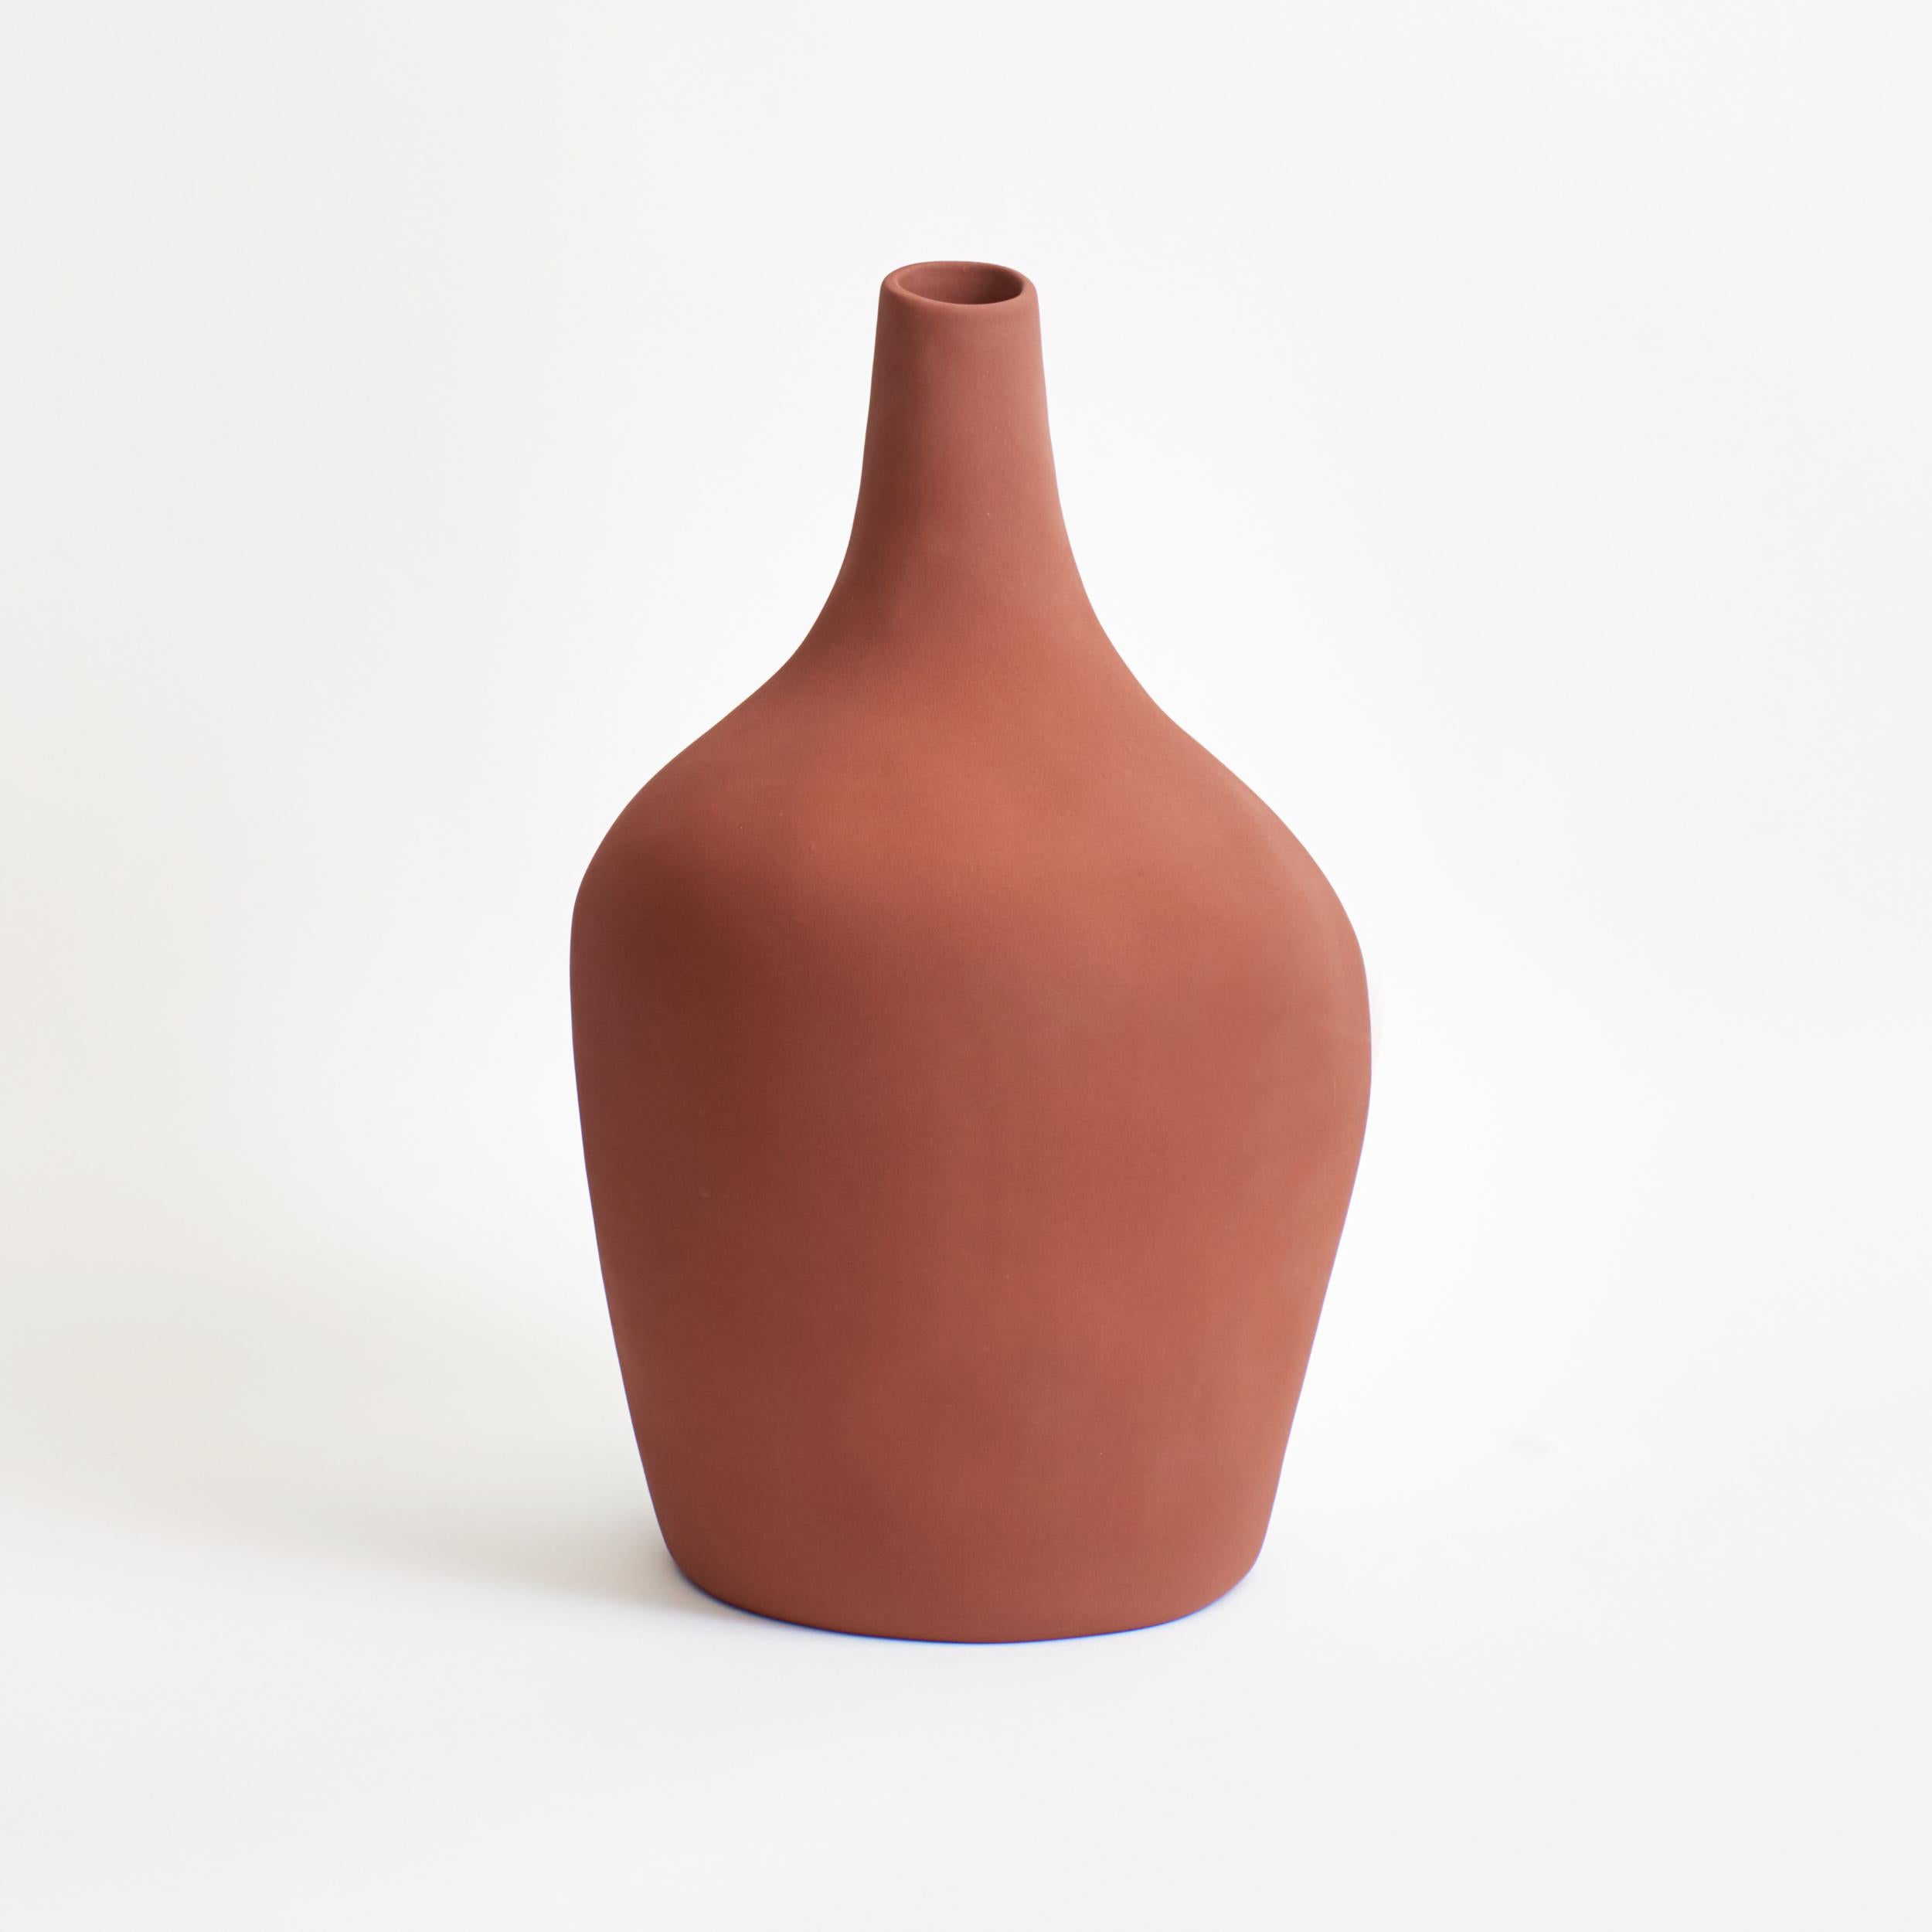 The Sailor vase by project 213A has been designed in 2020 and was launched in 2021.
This glaze has a rough almost sandy texture and comes in a soft brick colour
Handmade in Portugal by local craftsmen.
This stoneware vase is sculpted by hand and